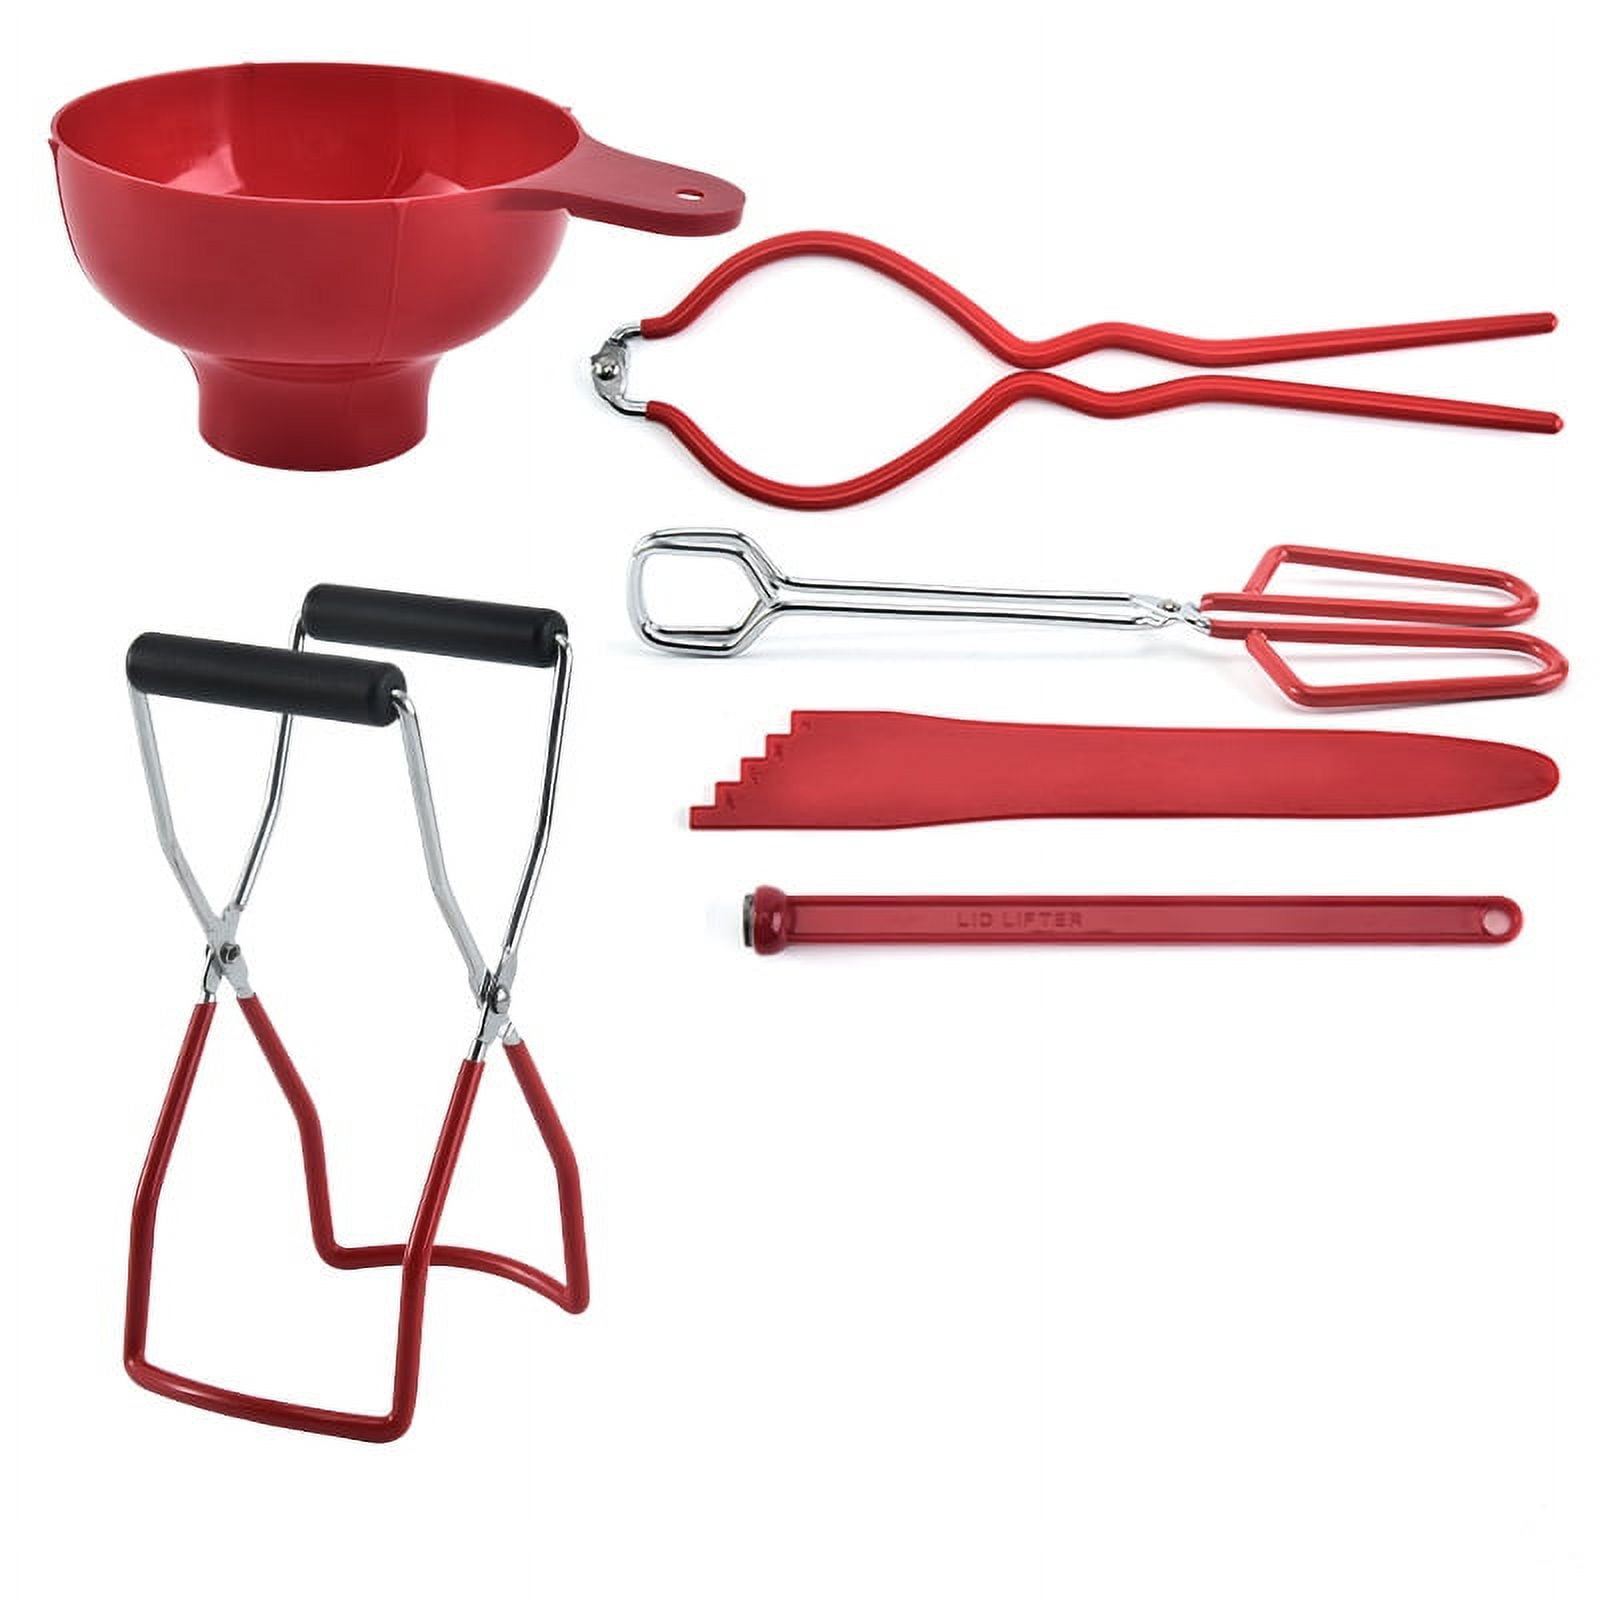 Canning Kit, Canning Supplies Kit, 7-Piece Professional Canning Set,  Canning Kits Complete And Multifunctional, Canning Supplies Dishwasher  Safe, Canning Tools BPA free - Buy Online - 424321268